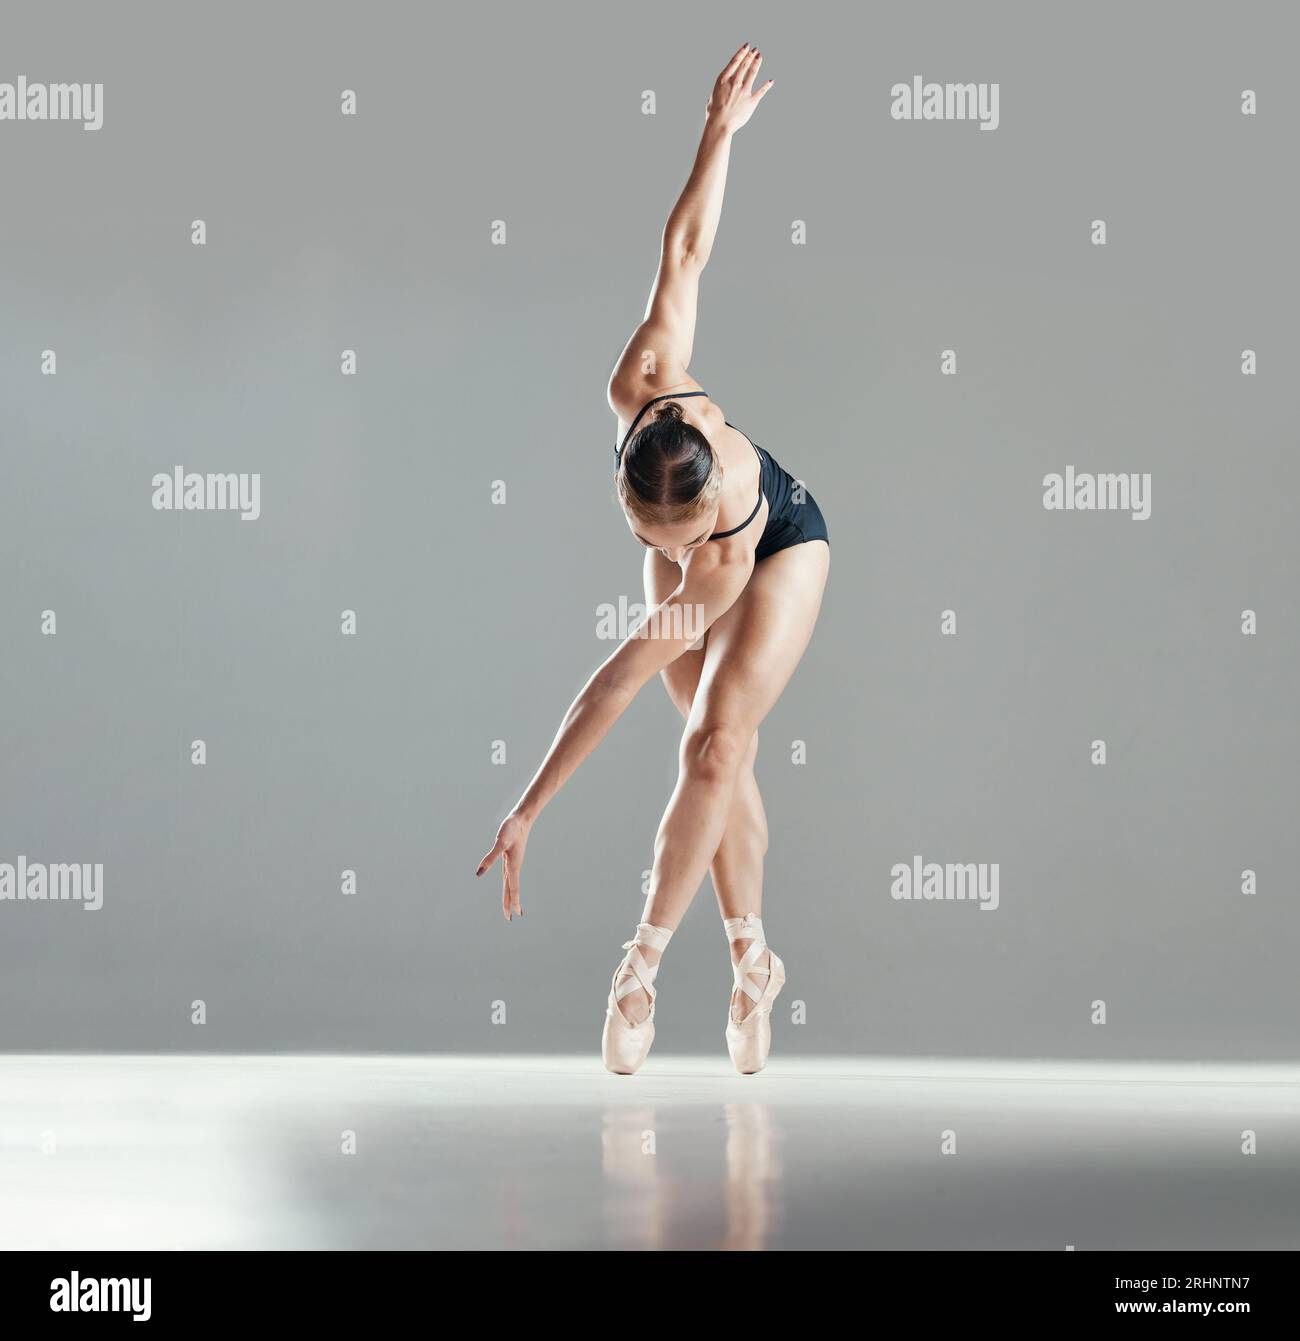 Mockup, space or woman ballet dancing or moving for wellness, balance or  creative performance. Studio, dancer or girl ballerina training to exercise  Stock Photo - Alamy